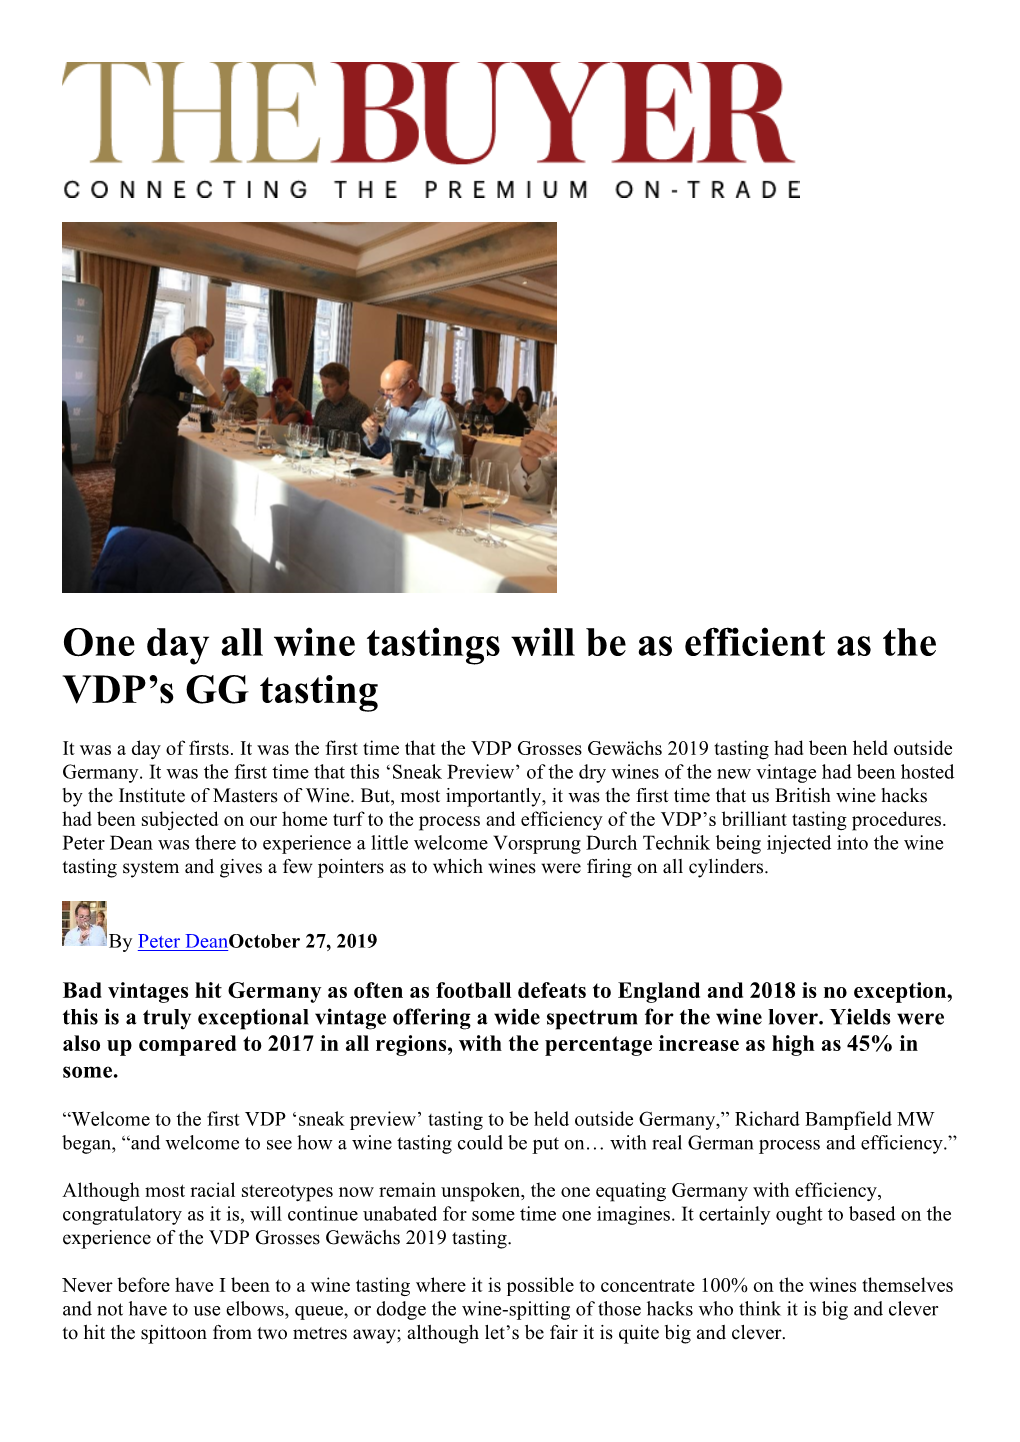 One Day All Wine Tastings Will Be As Efficient As the VDP's GG Tasting